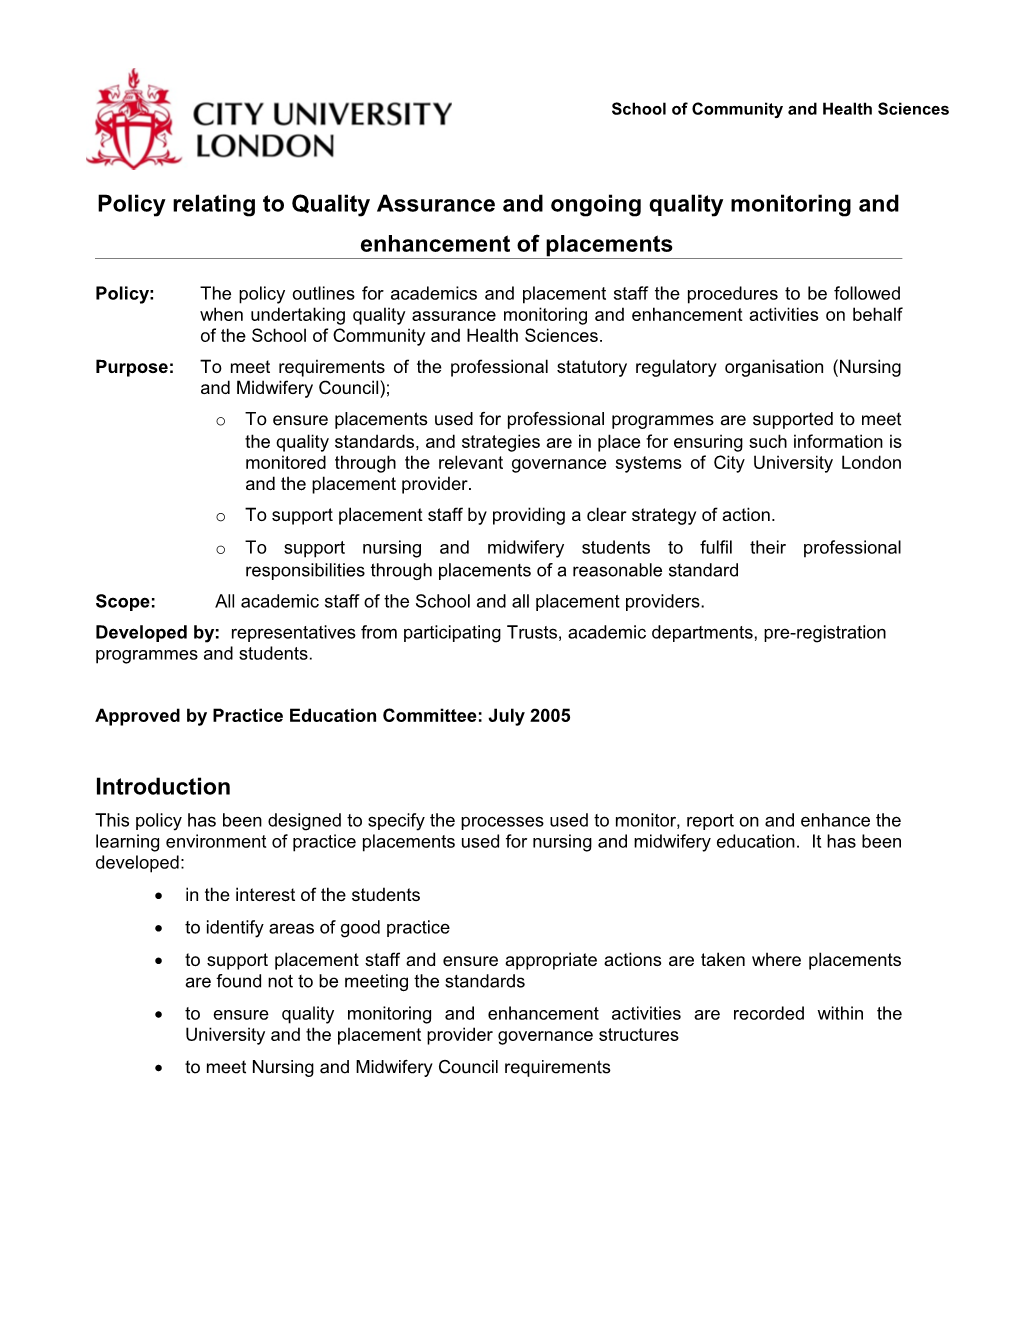 Policy Relating to Quality Assurance and Ongoing Quality Monitoring and Enhancement Of